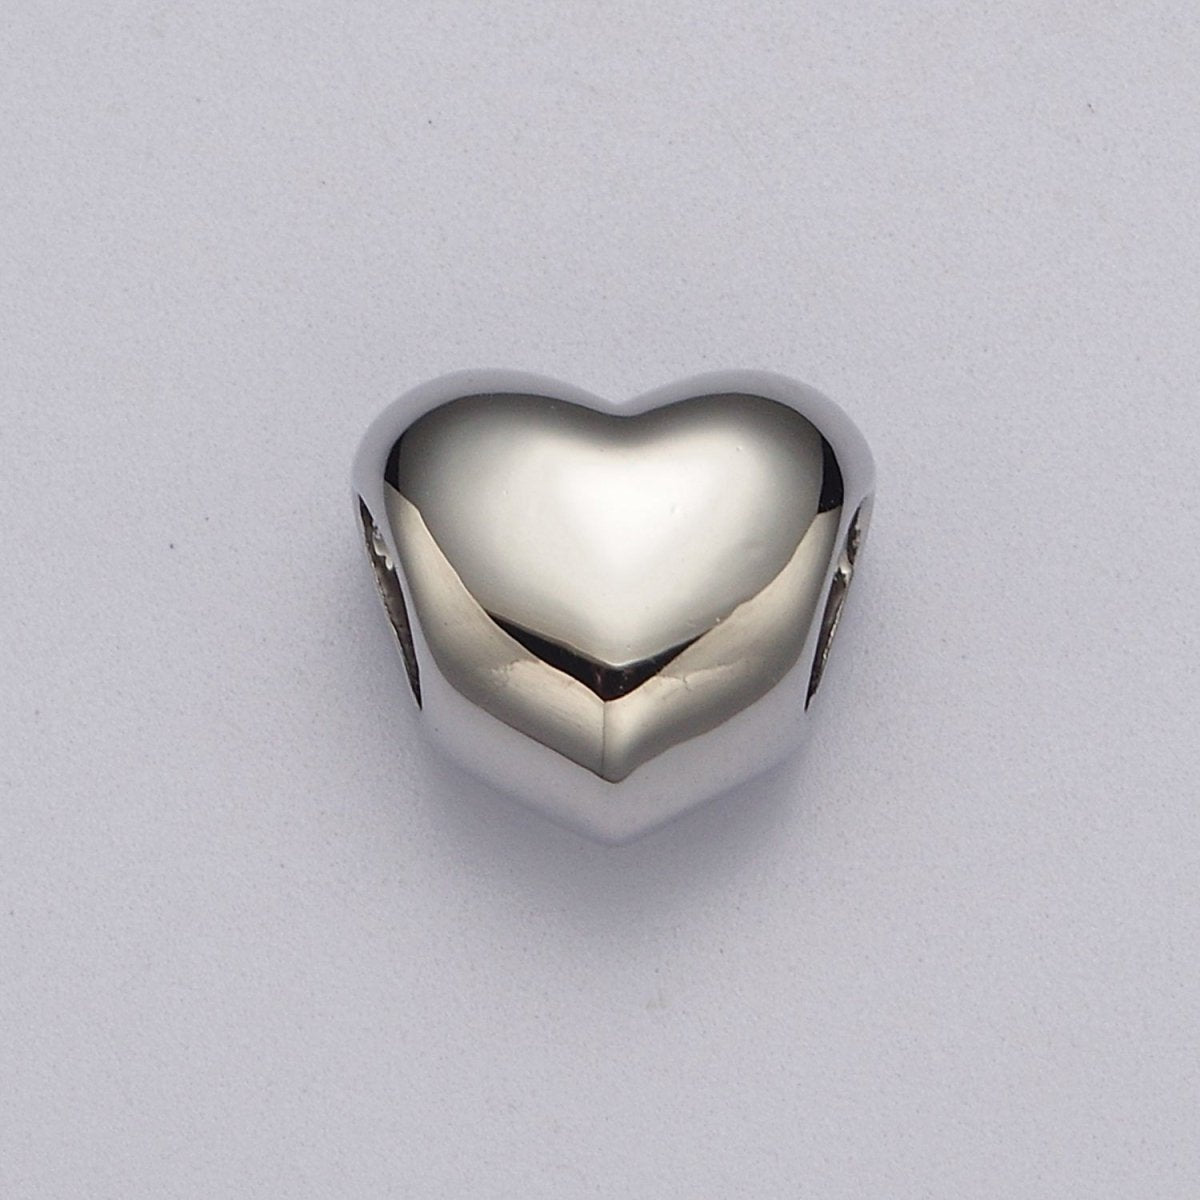 Rose Gold / Silver / Black Heart Spacer Beads, Heart Shape Spacer Charms Big Hole Bead High Quality Beads B-182 B-183 B-184 - DLUXCA